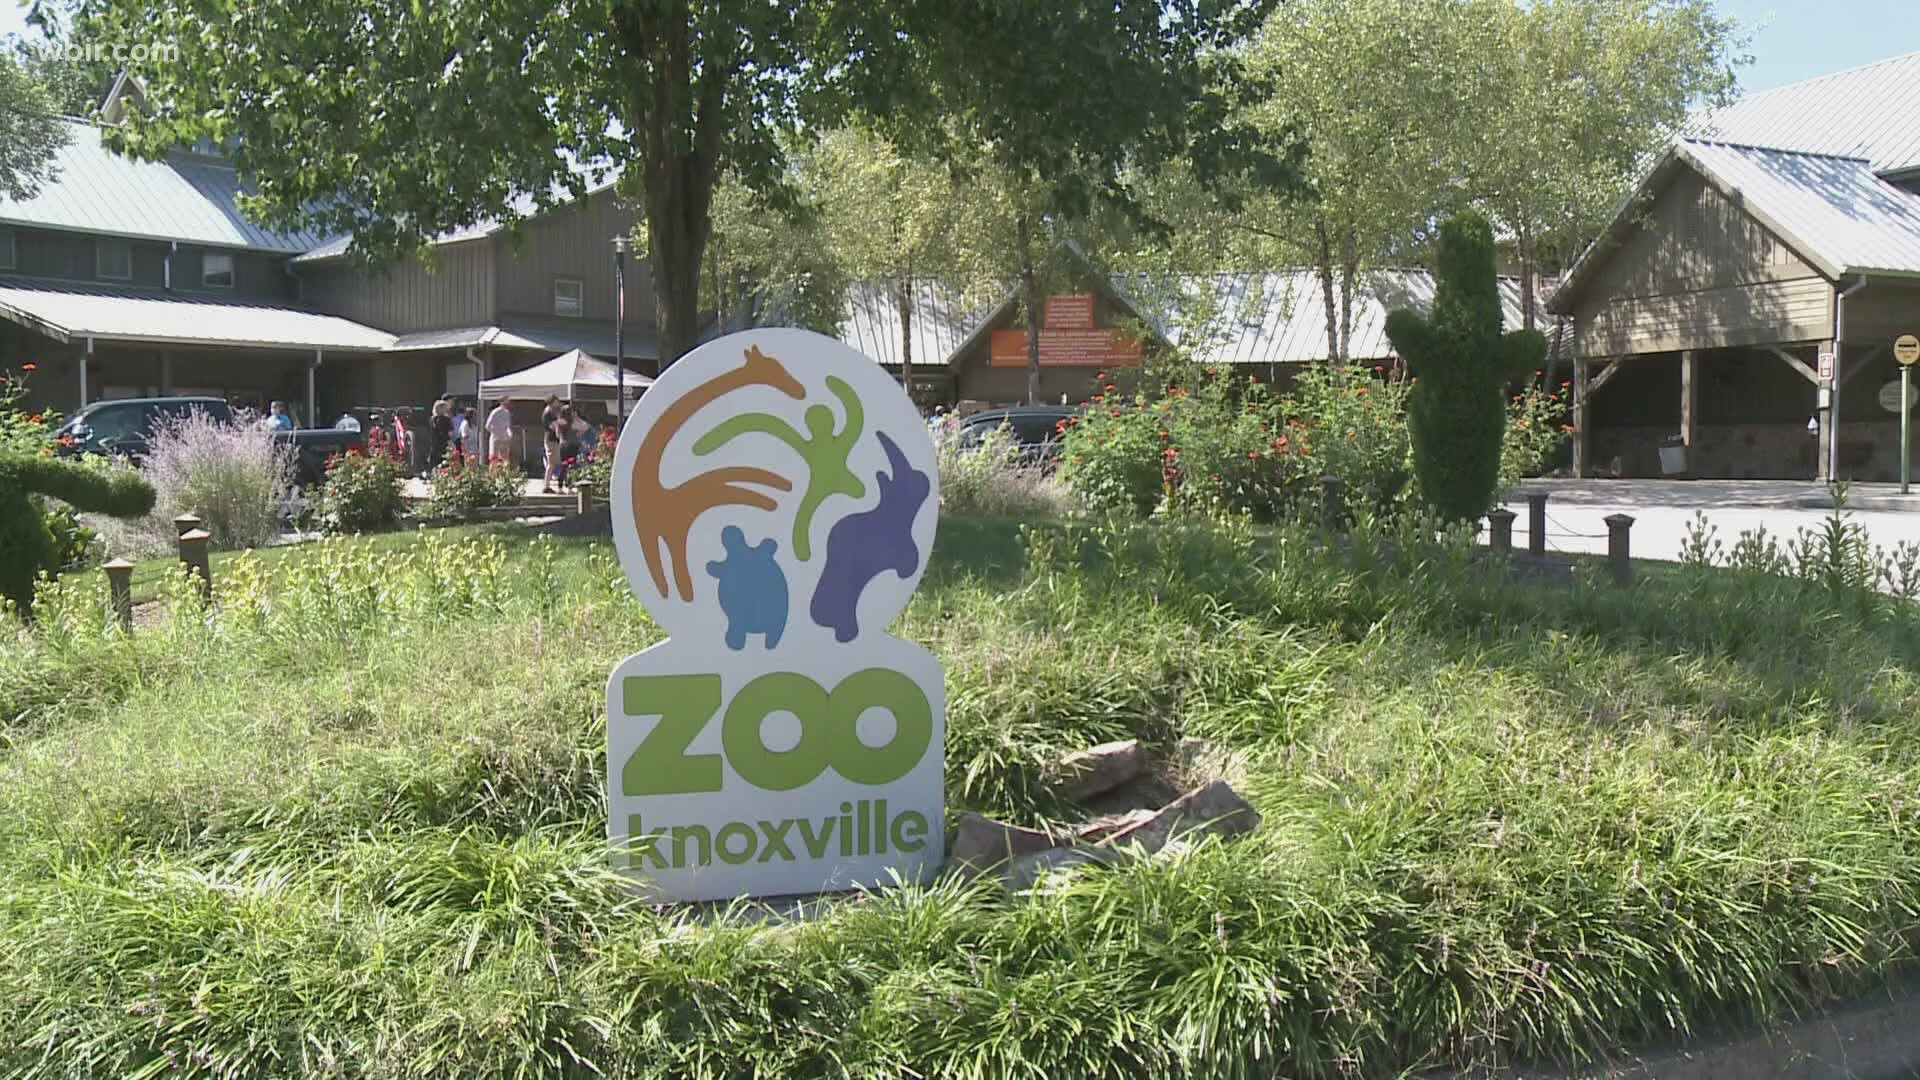 This month Zoo Knoxville will kick off a new "Craft Bear Night" event.